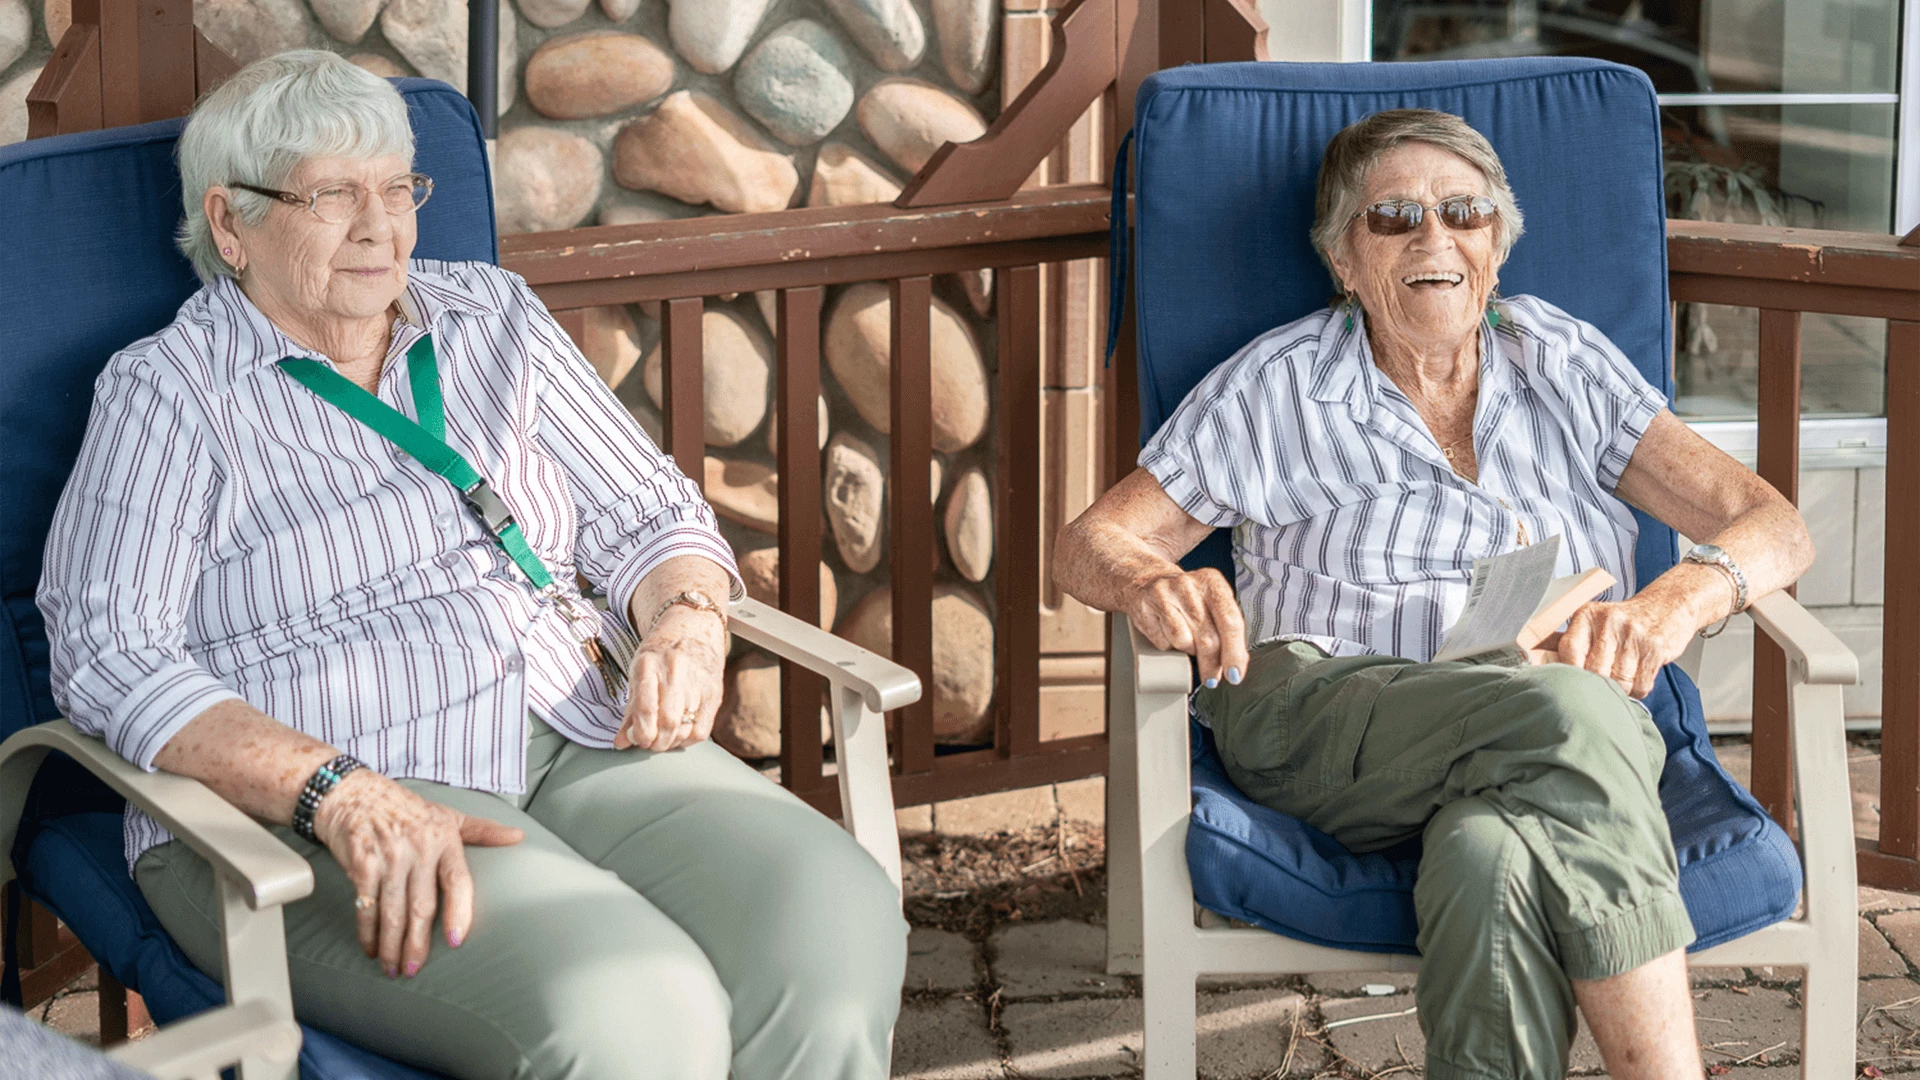 In the patio's shadow, two elderly people are seated and smiling